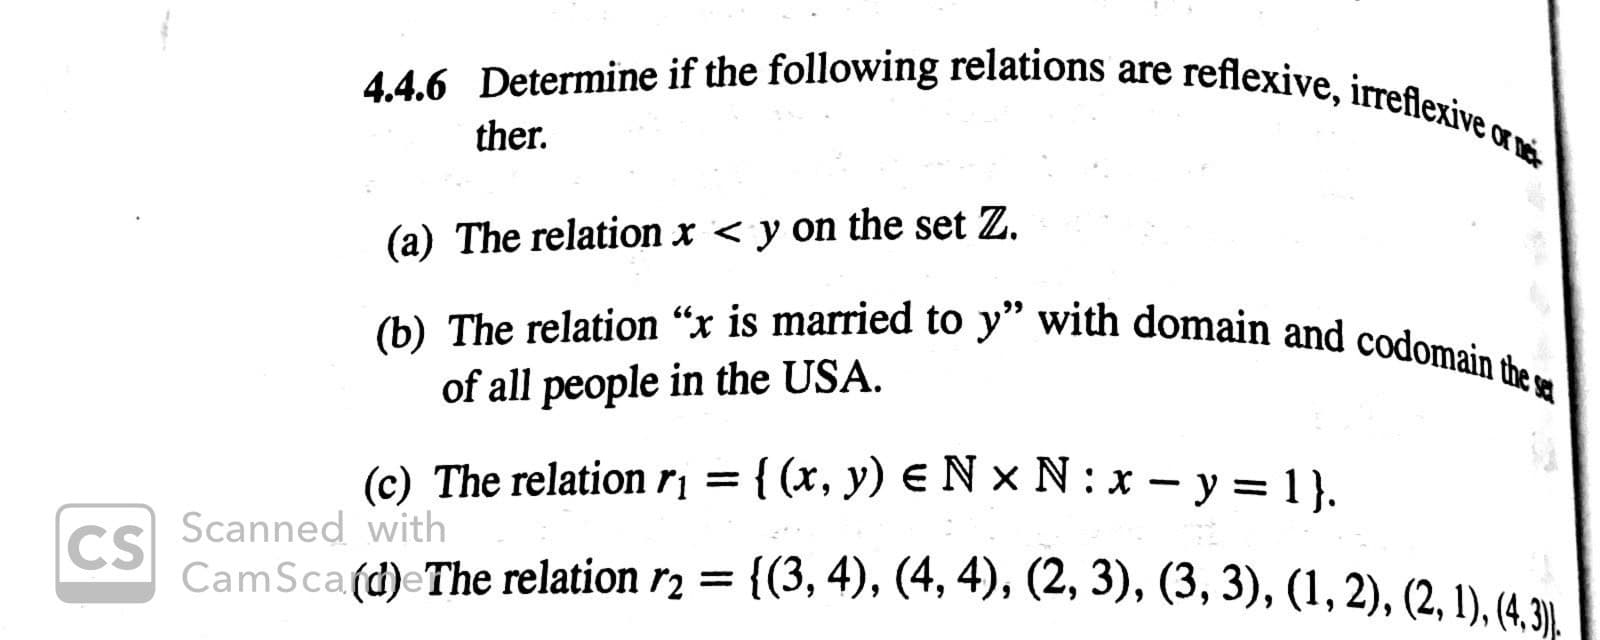 4.4.6 Determine if the following relations are reflexive, irreflexive o
ther
(a) The relation x < y on the set Z.
(b) The relation "x is married to y" with domain and codomain the a
of all people in the USA
(c) The relation r= { (x, y) e N x N: x-y = 1 }.
Scanned with
CS
CamSca (d)eThe relation r2 =
{(3, 4), (4,4), (2, 3), (3, 3), (1,2), (2,1), (4,3).
